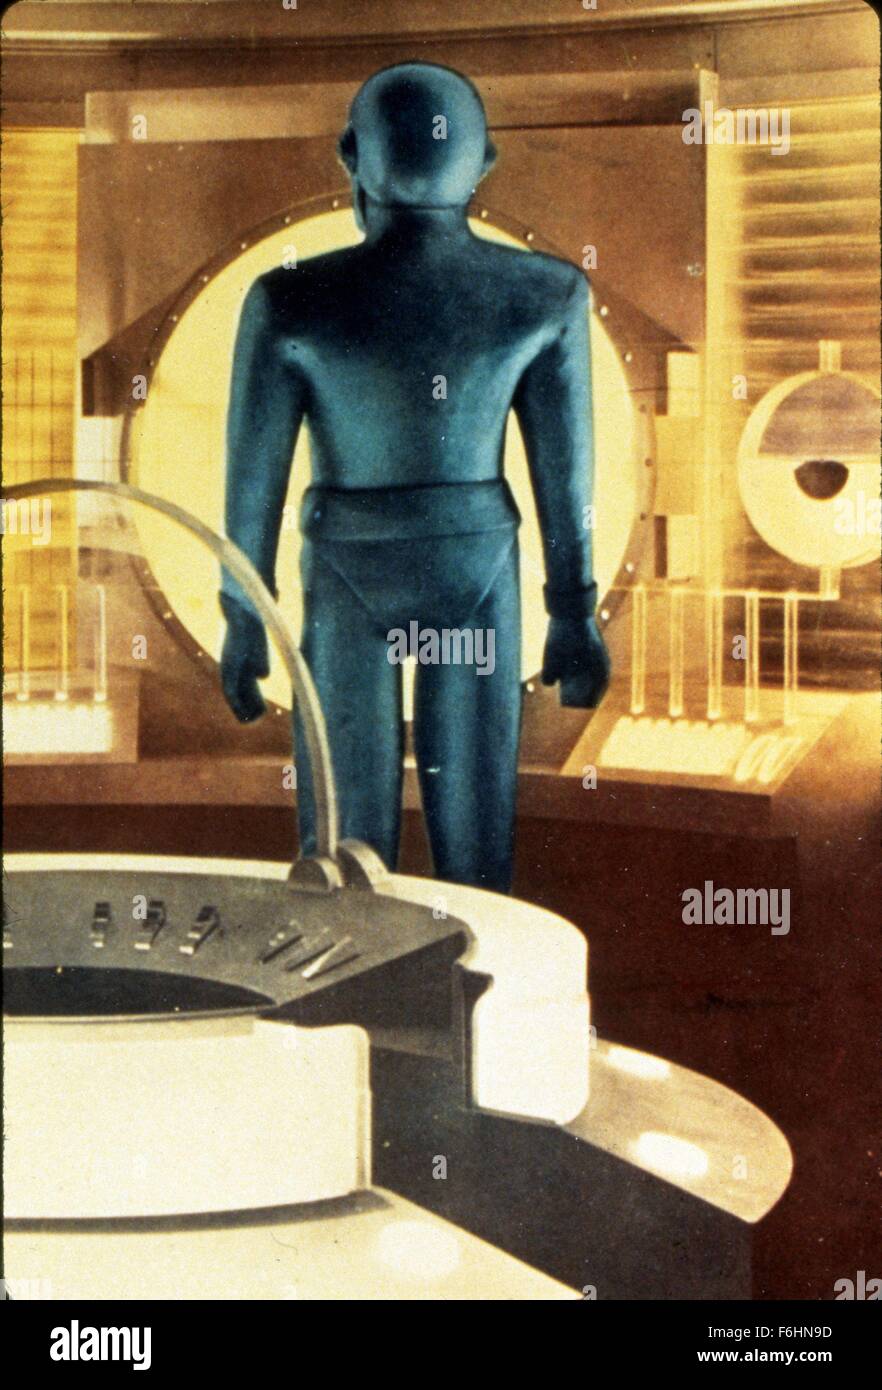 1951, Film Title: DAY THE EARTH STOOD STILL, Director: ROBERT WISE, Studio: FOX, Pictured: ALIENS (GOOD), ROBOTS-ANDROIDS-CYBORGS-CLONES, SCI-FI, ITS & ALIENS! THINGS. (Credit Image: SNAP) Stock Photo